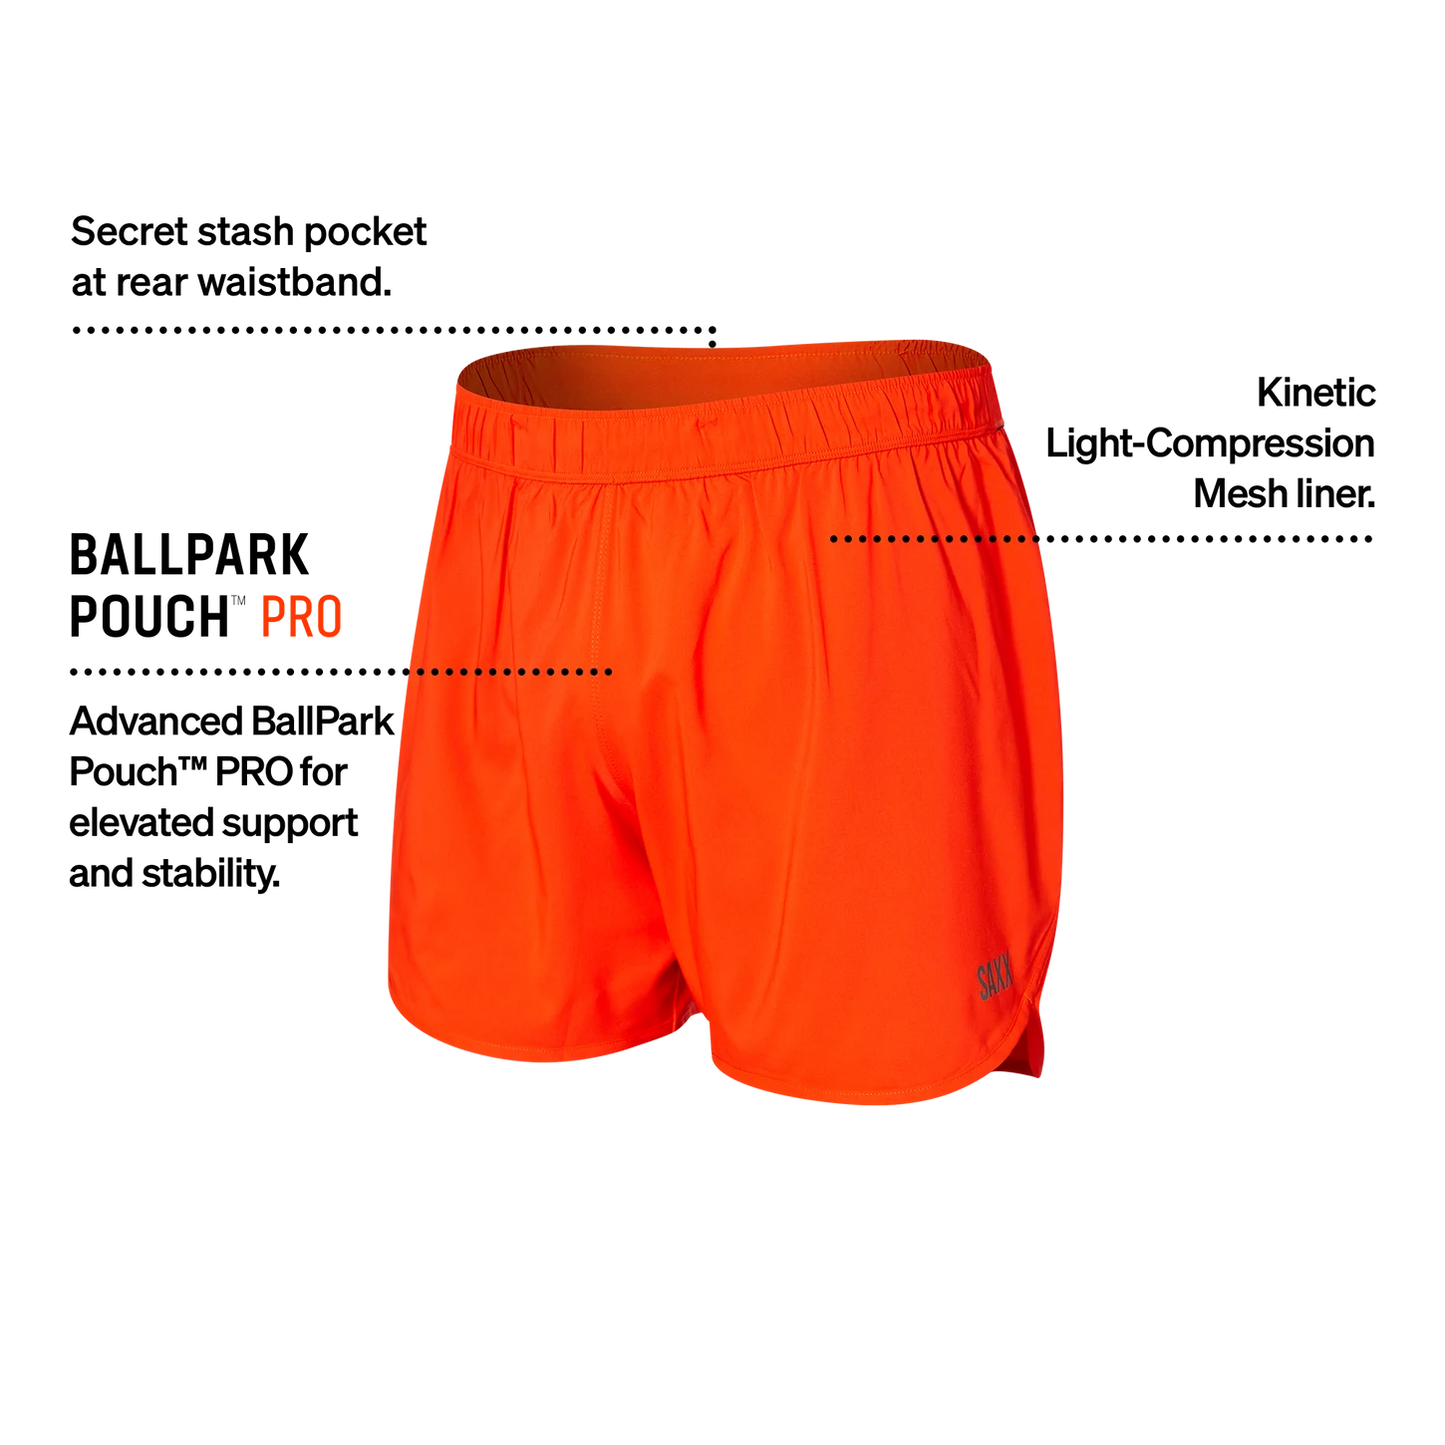 Hightail 2-in-1 Shorts